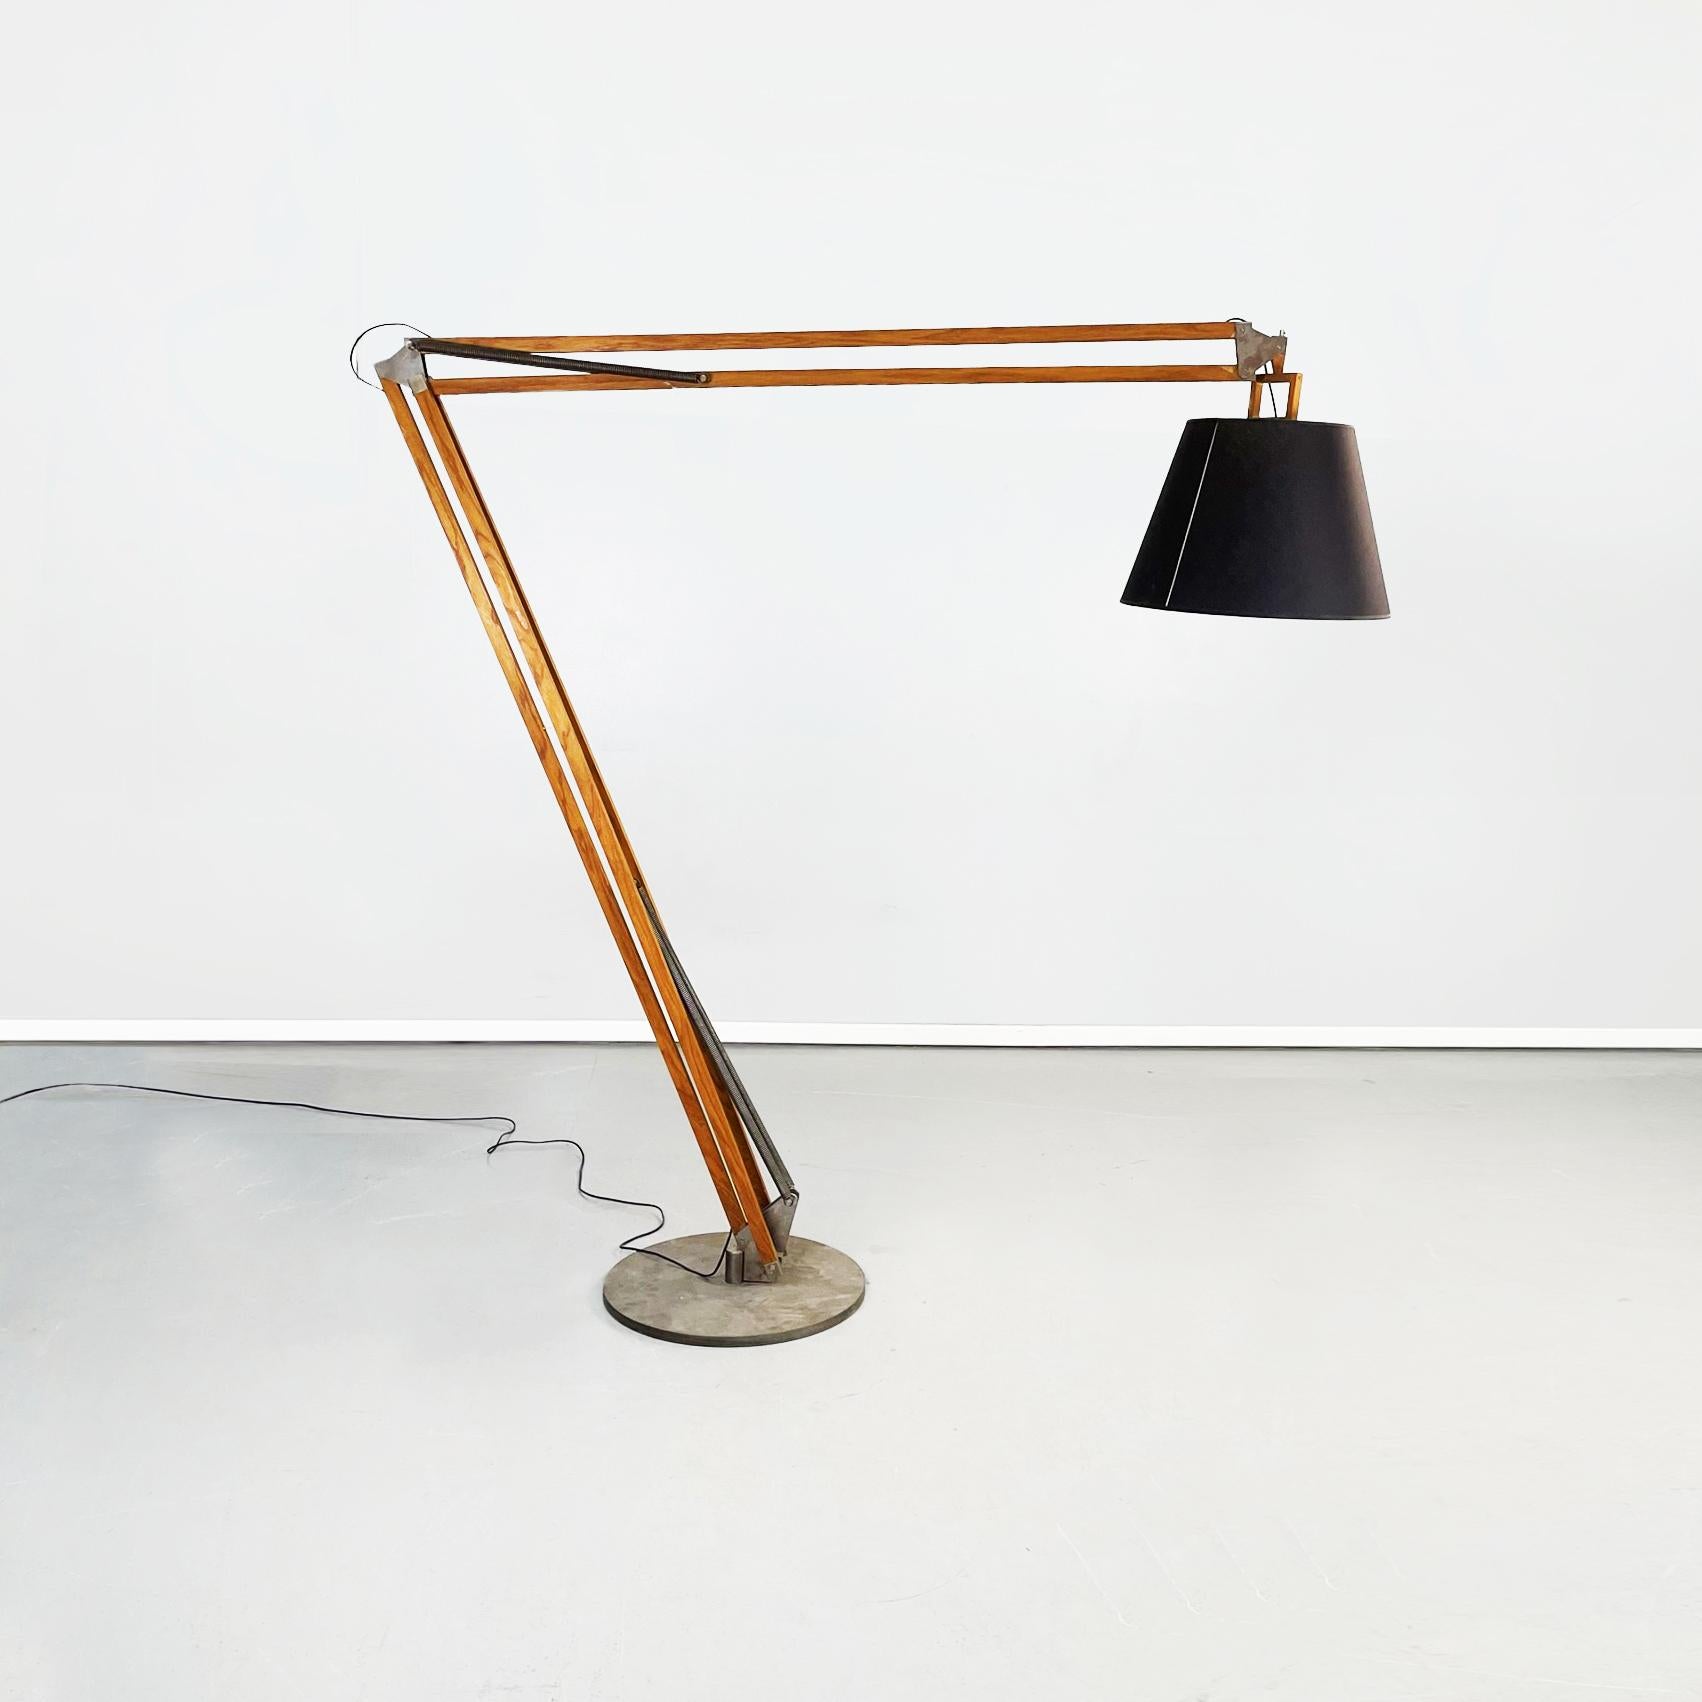 Italian Modern 21th century wooden and iron floor lamp Golia, 2000s
Floor lamp mod. Golia with round iron base and wooden structure. The structure consists of 2 arms with a pantograph system that allows you to maintain the desired positions. The